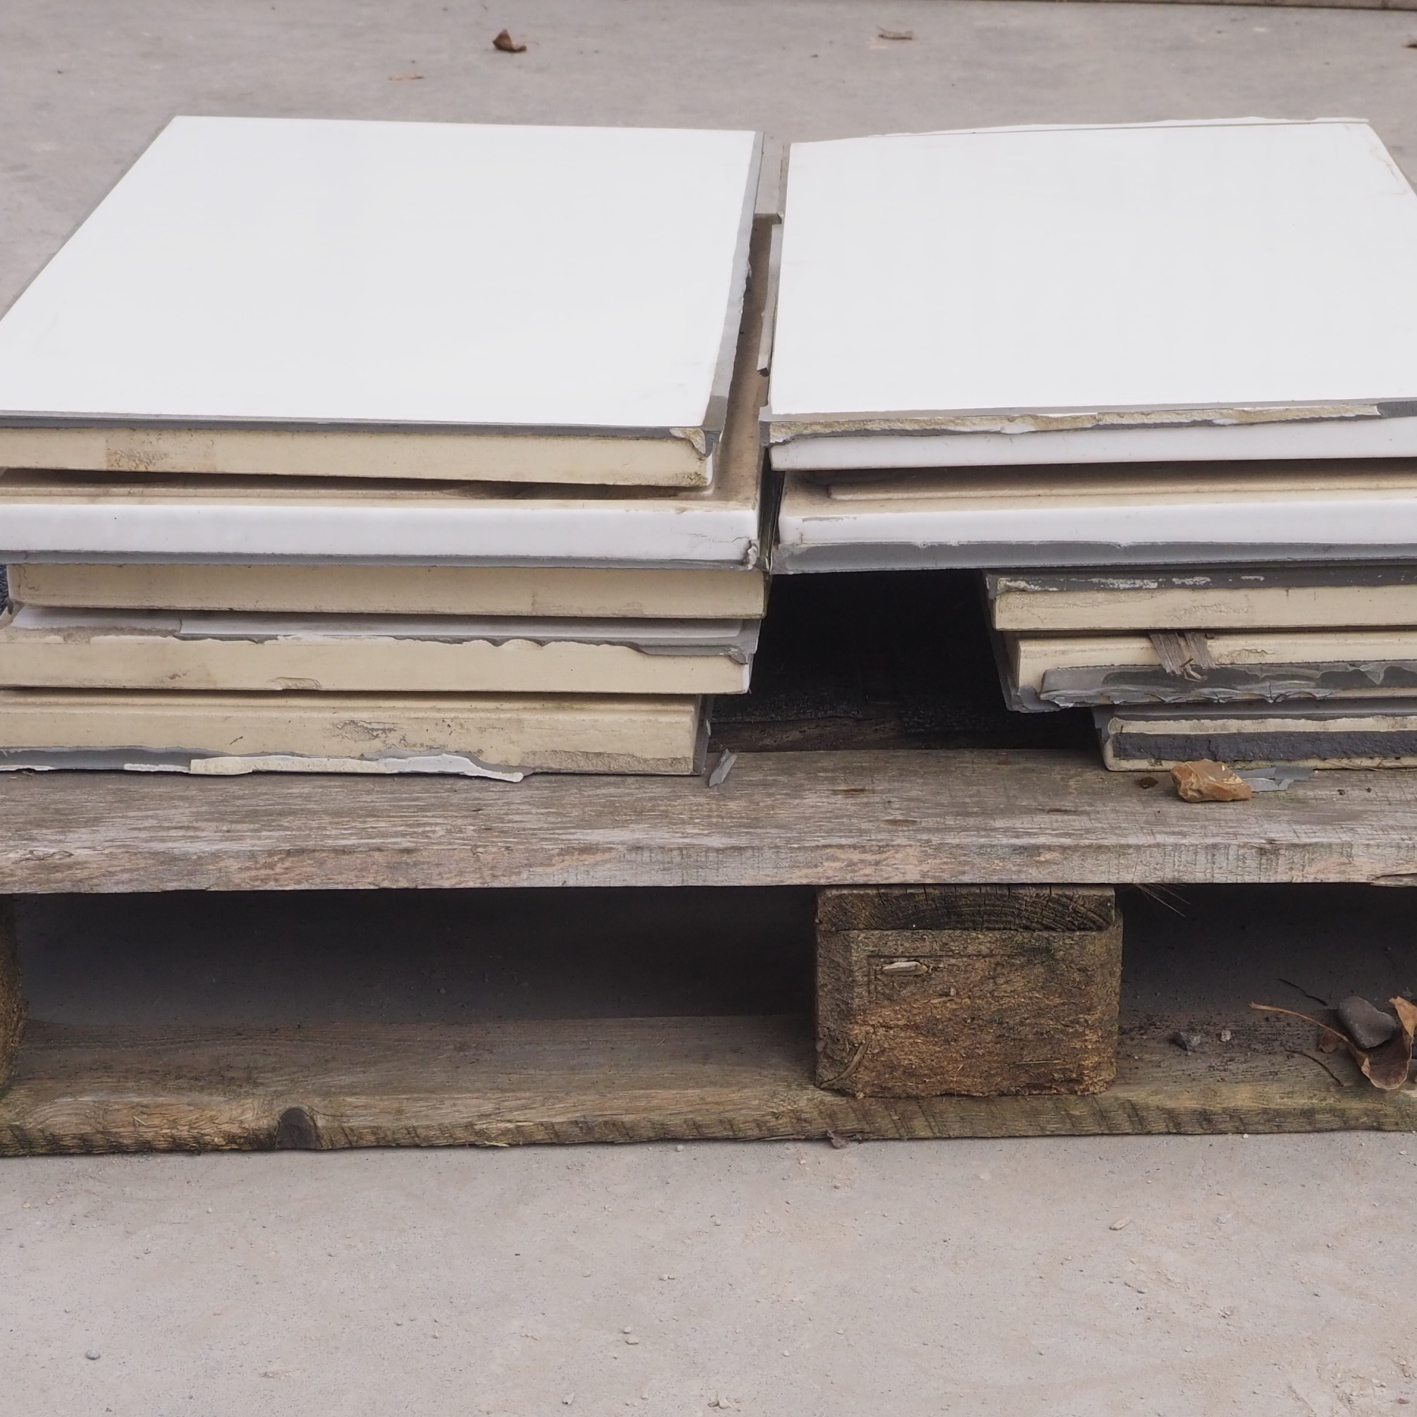 Batch of large porcelain tiles from laboratory worktops